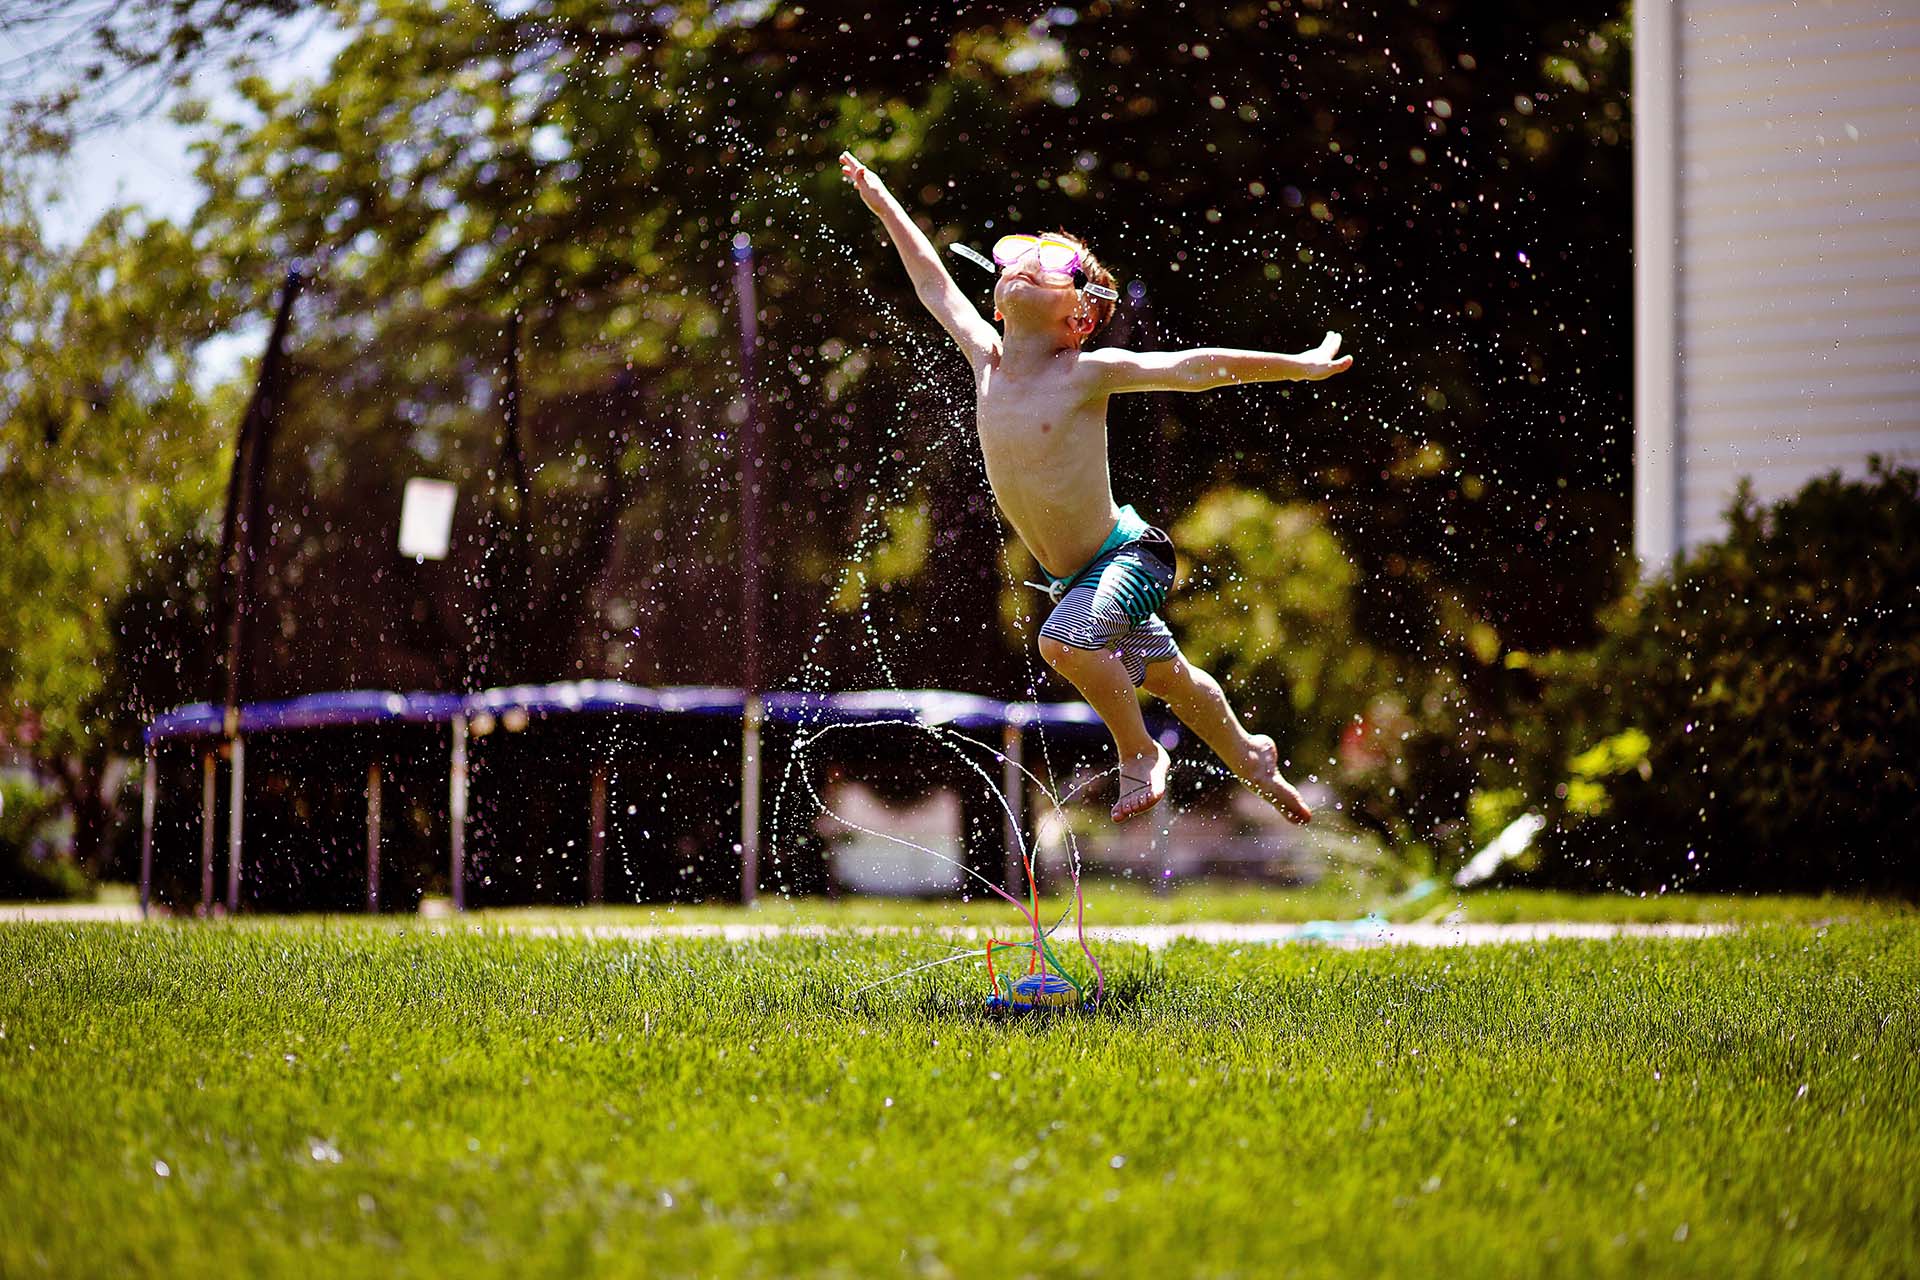 Child plays in the sprinklers during summer to beat the heat